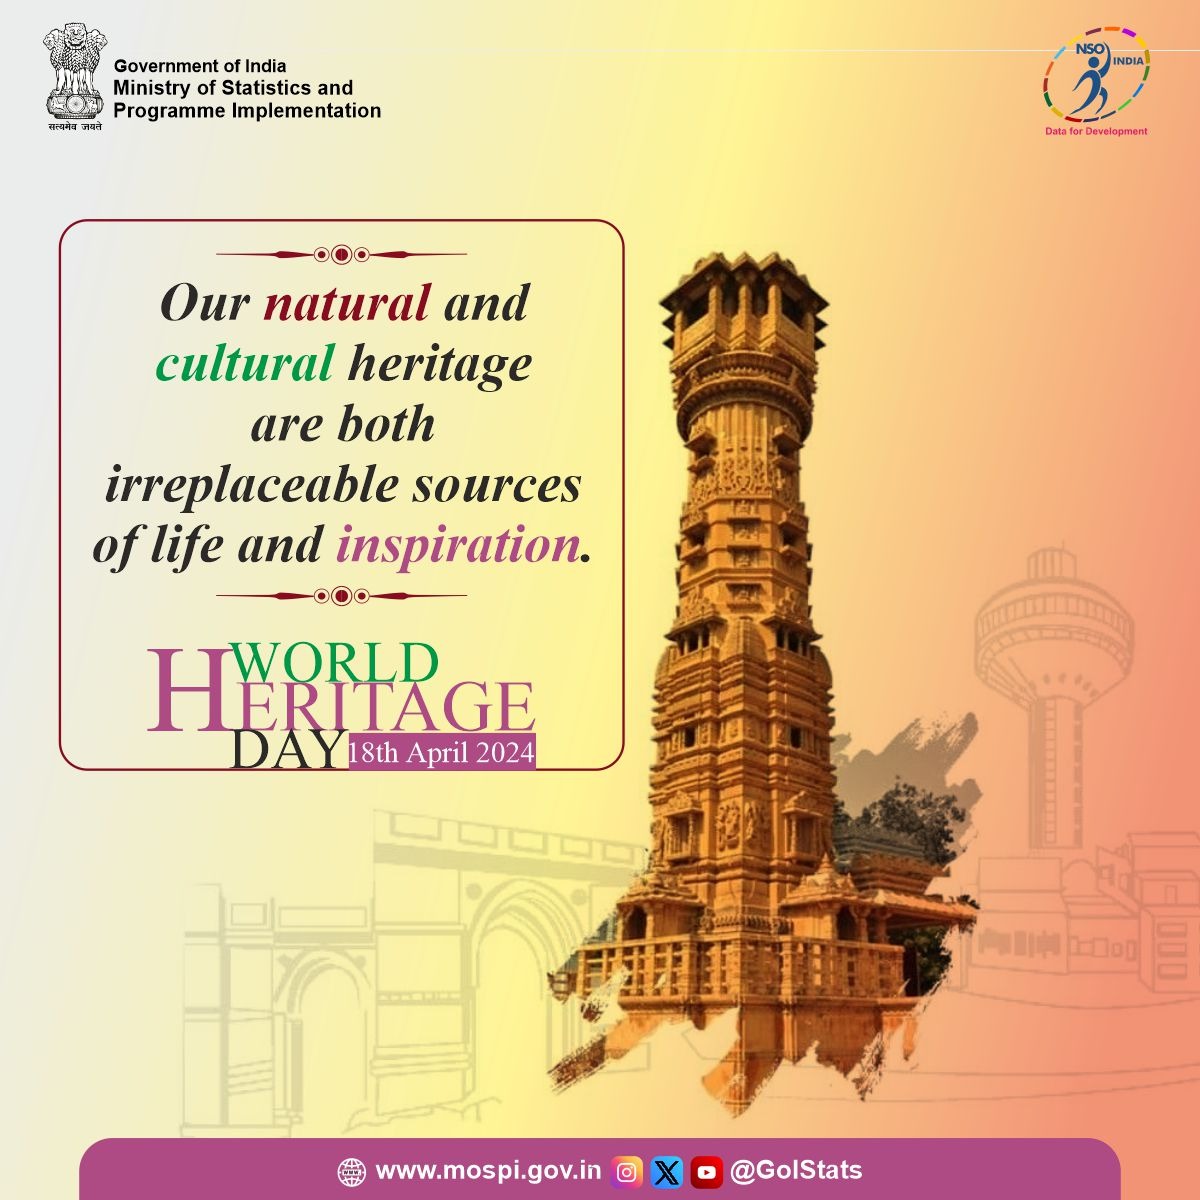 “Our natural and cultural heritage are both irreplaceable sources of life and inspiration.' Let us pledge to make all possible efforts required to protect and conserve precious monuments and heritage sites. Happy World Heritage Day.